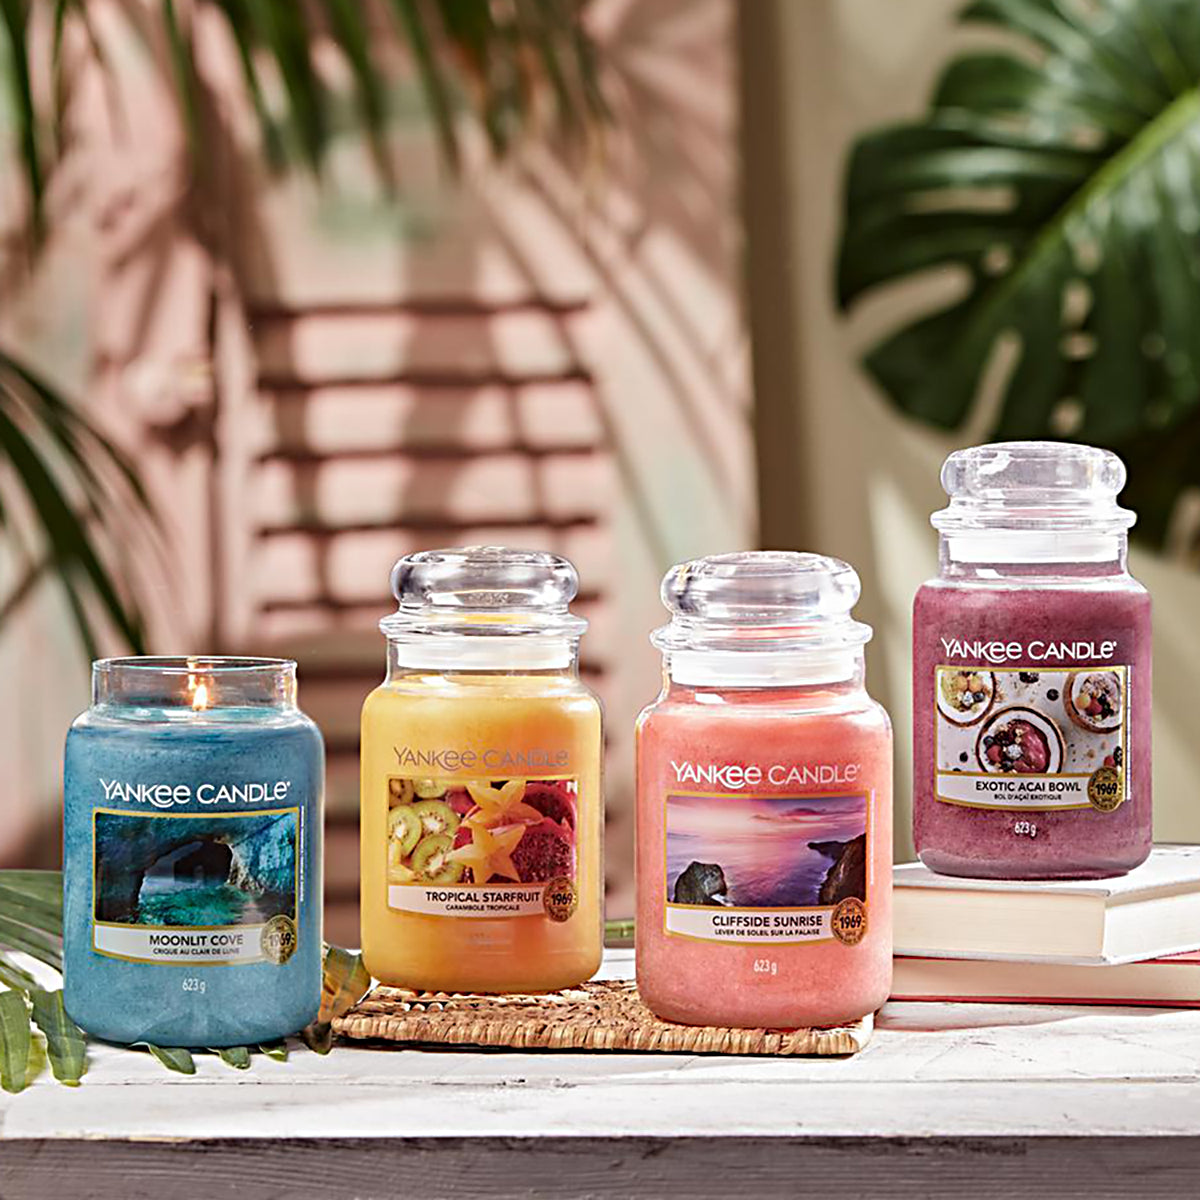 MOONLIT COVE -Yankee Candle- Candela Sampler – Candle With Care